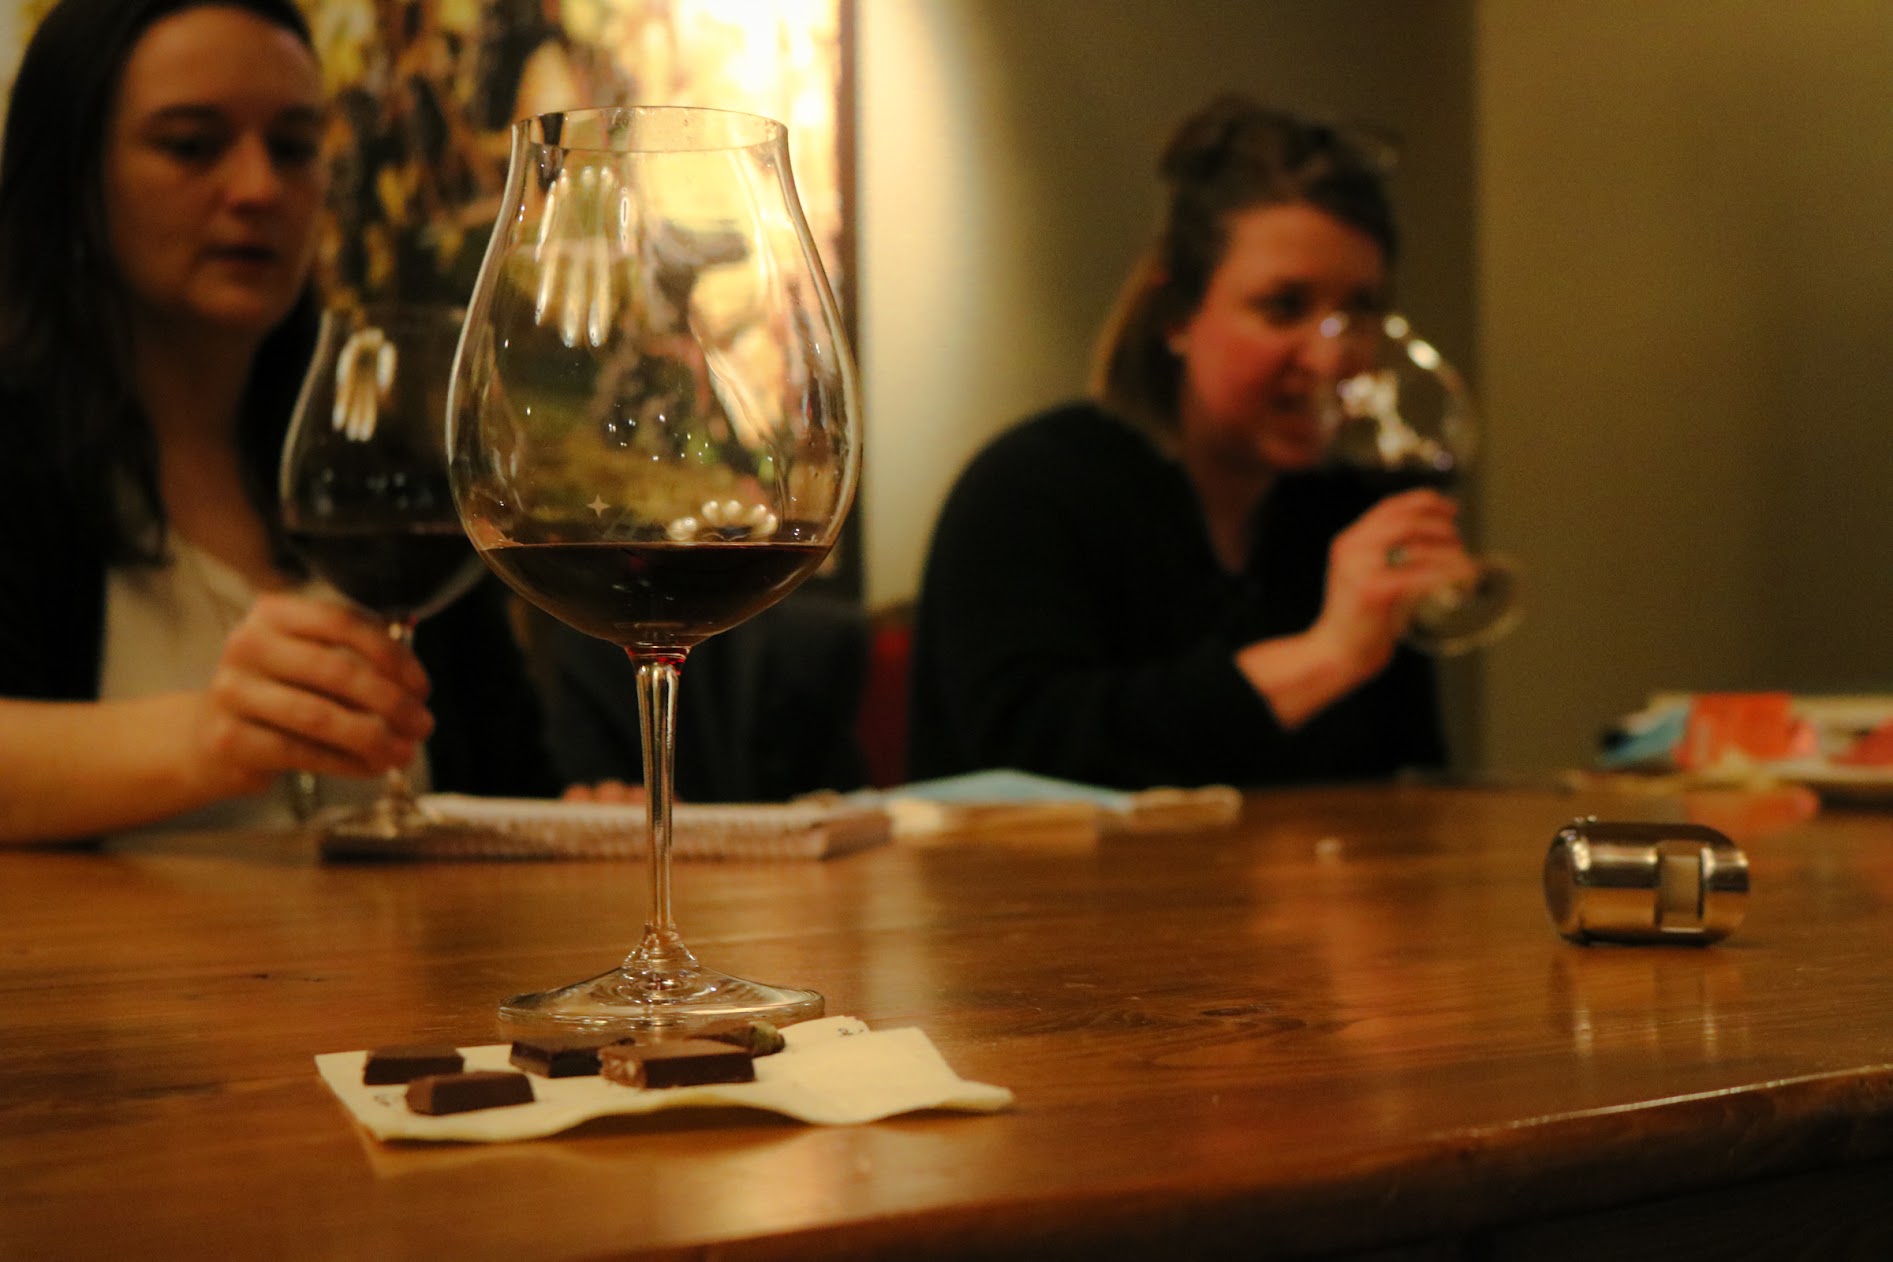 Winery Ambassadors sample wine and chocolate at the Estate to find the best pairings.